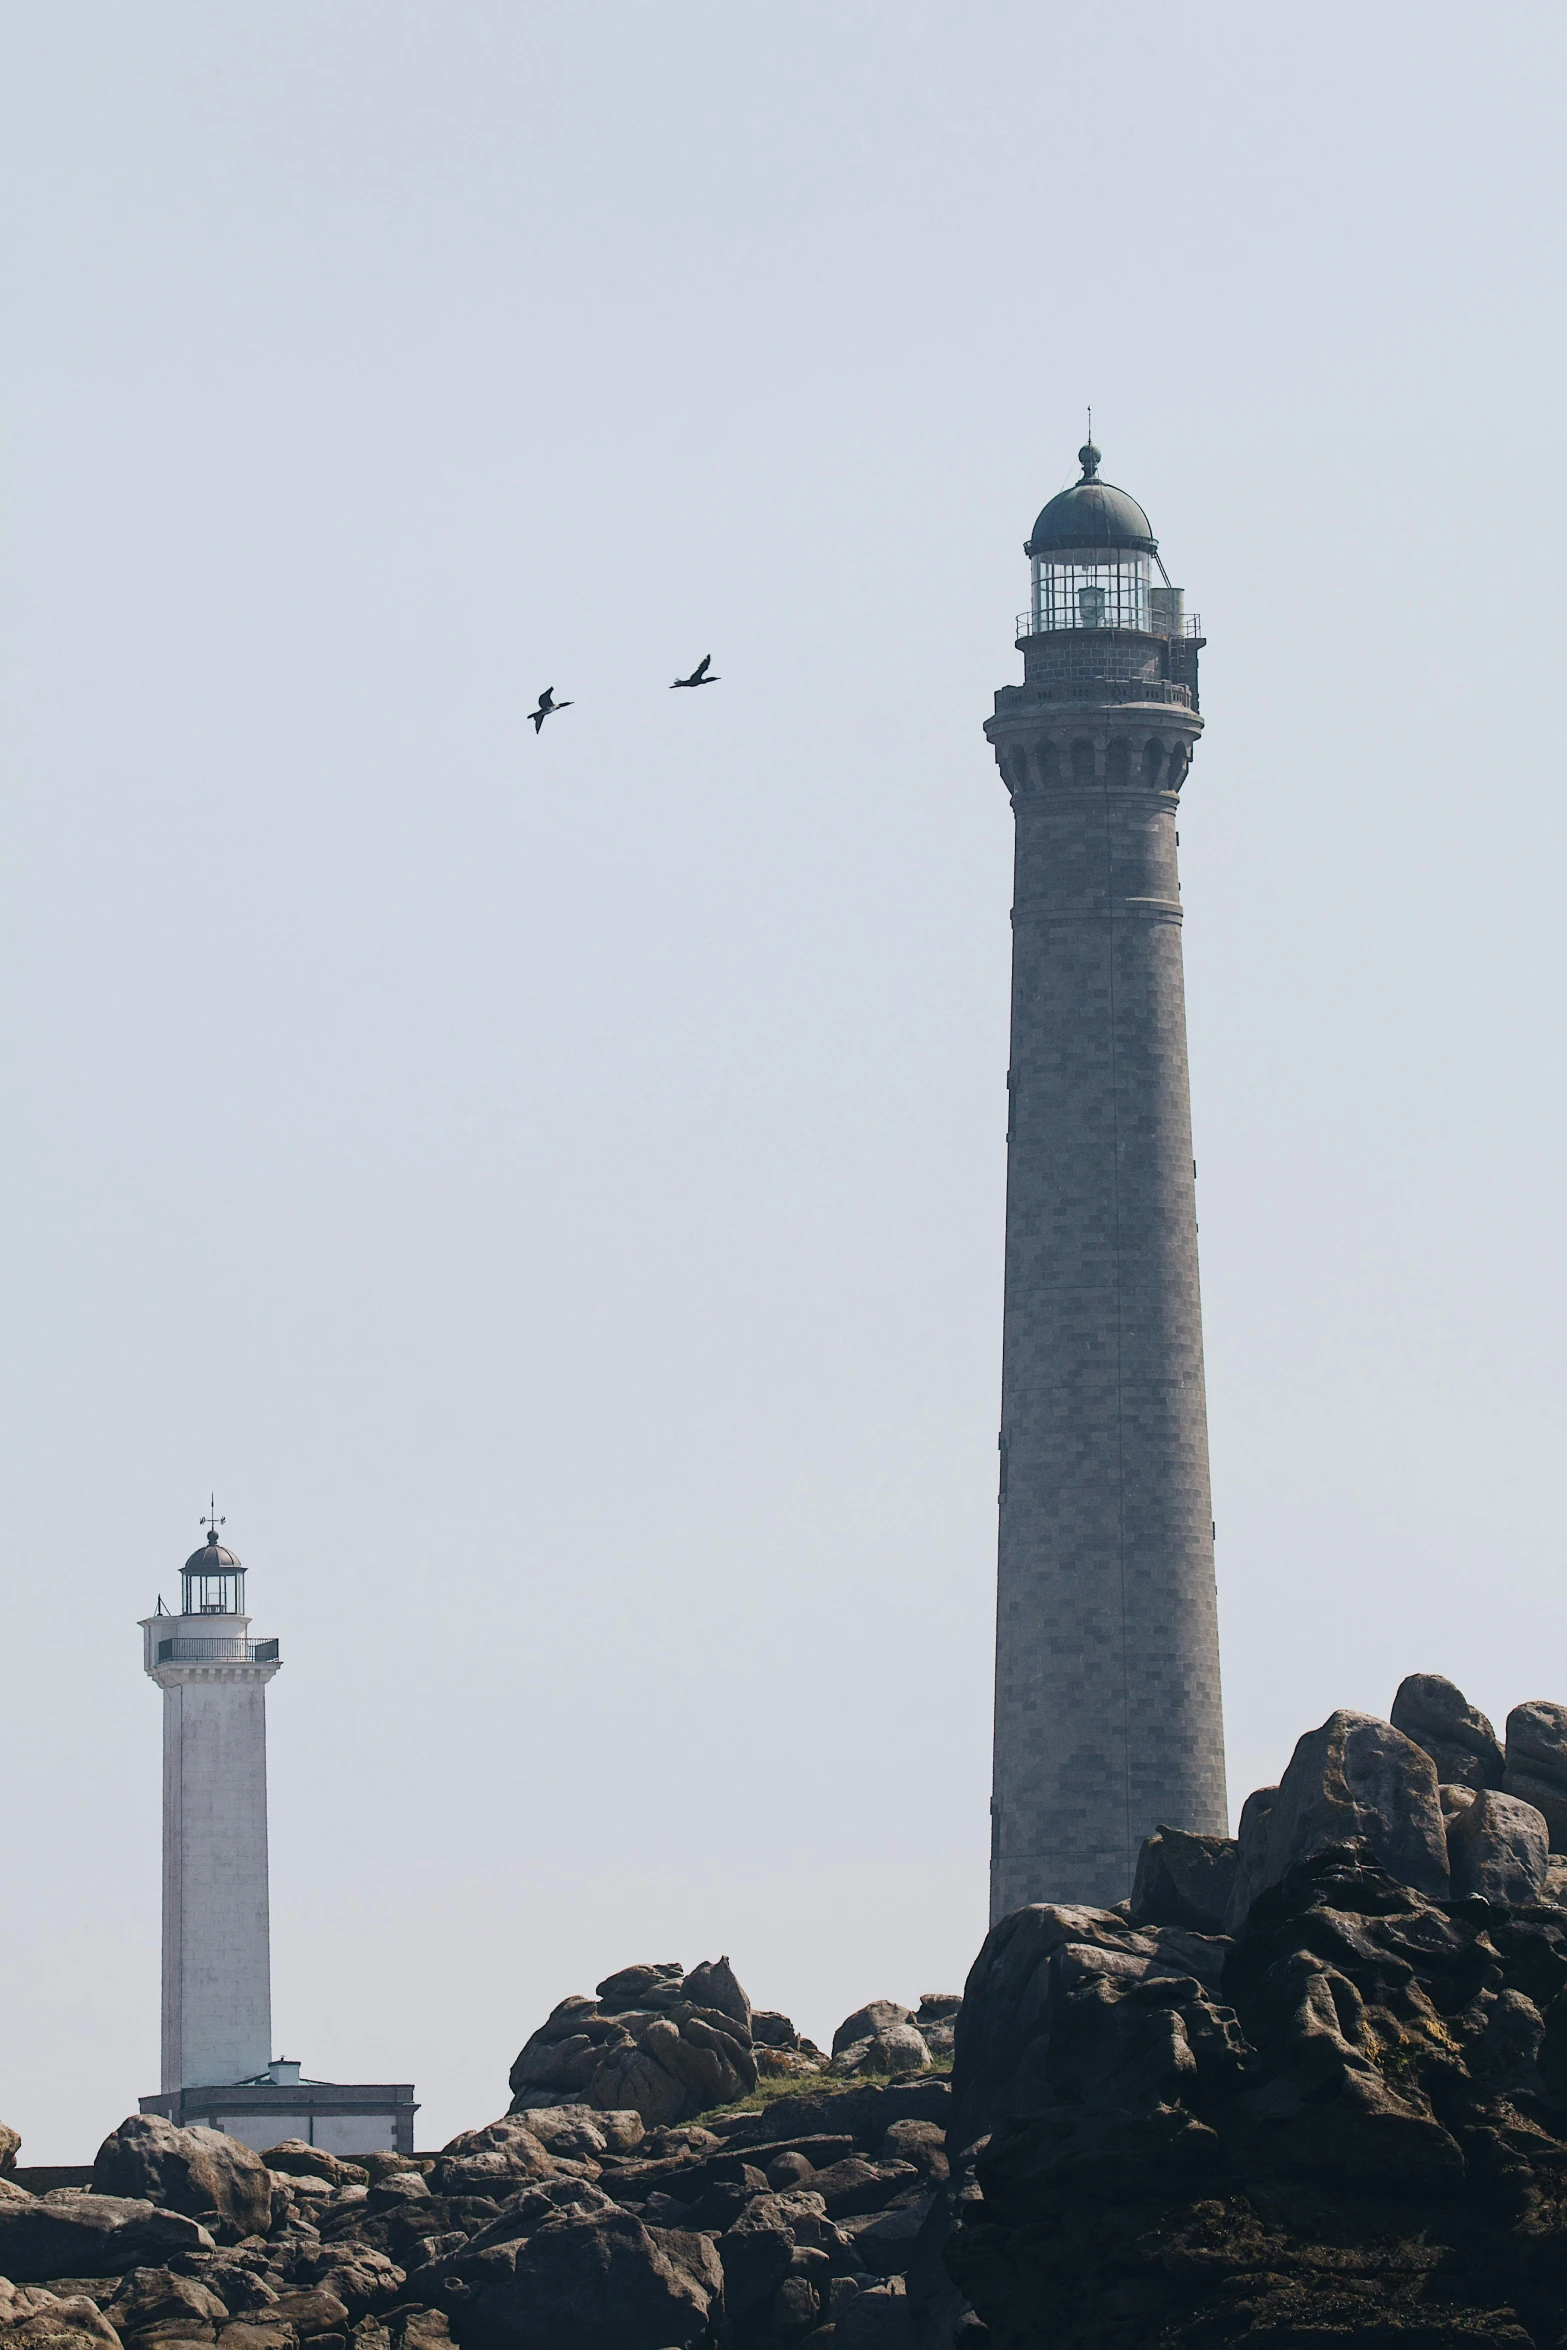 the two light towers are built high on the rocky shore